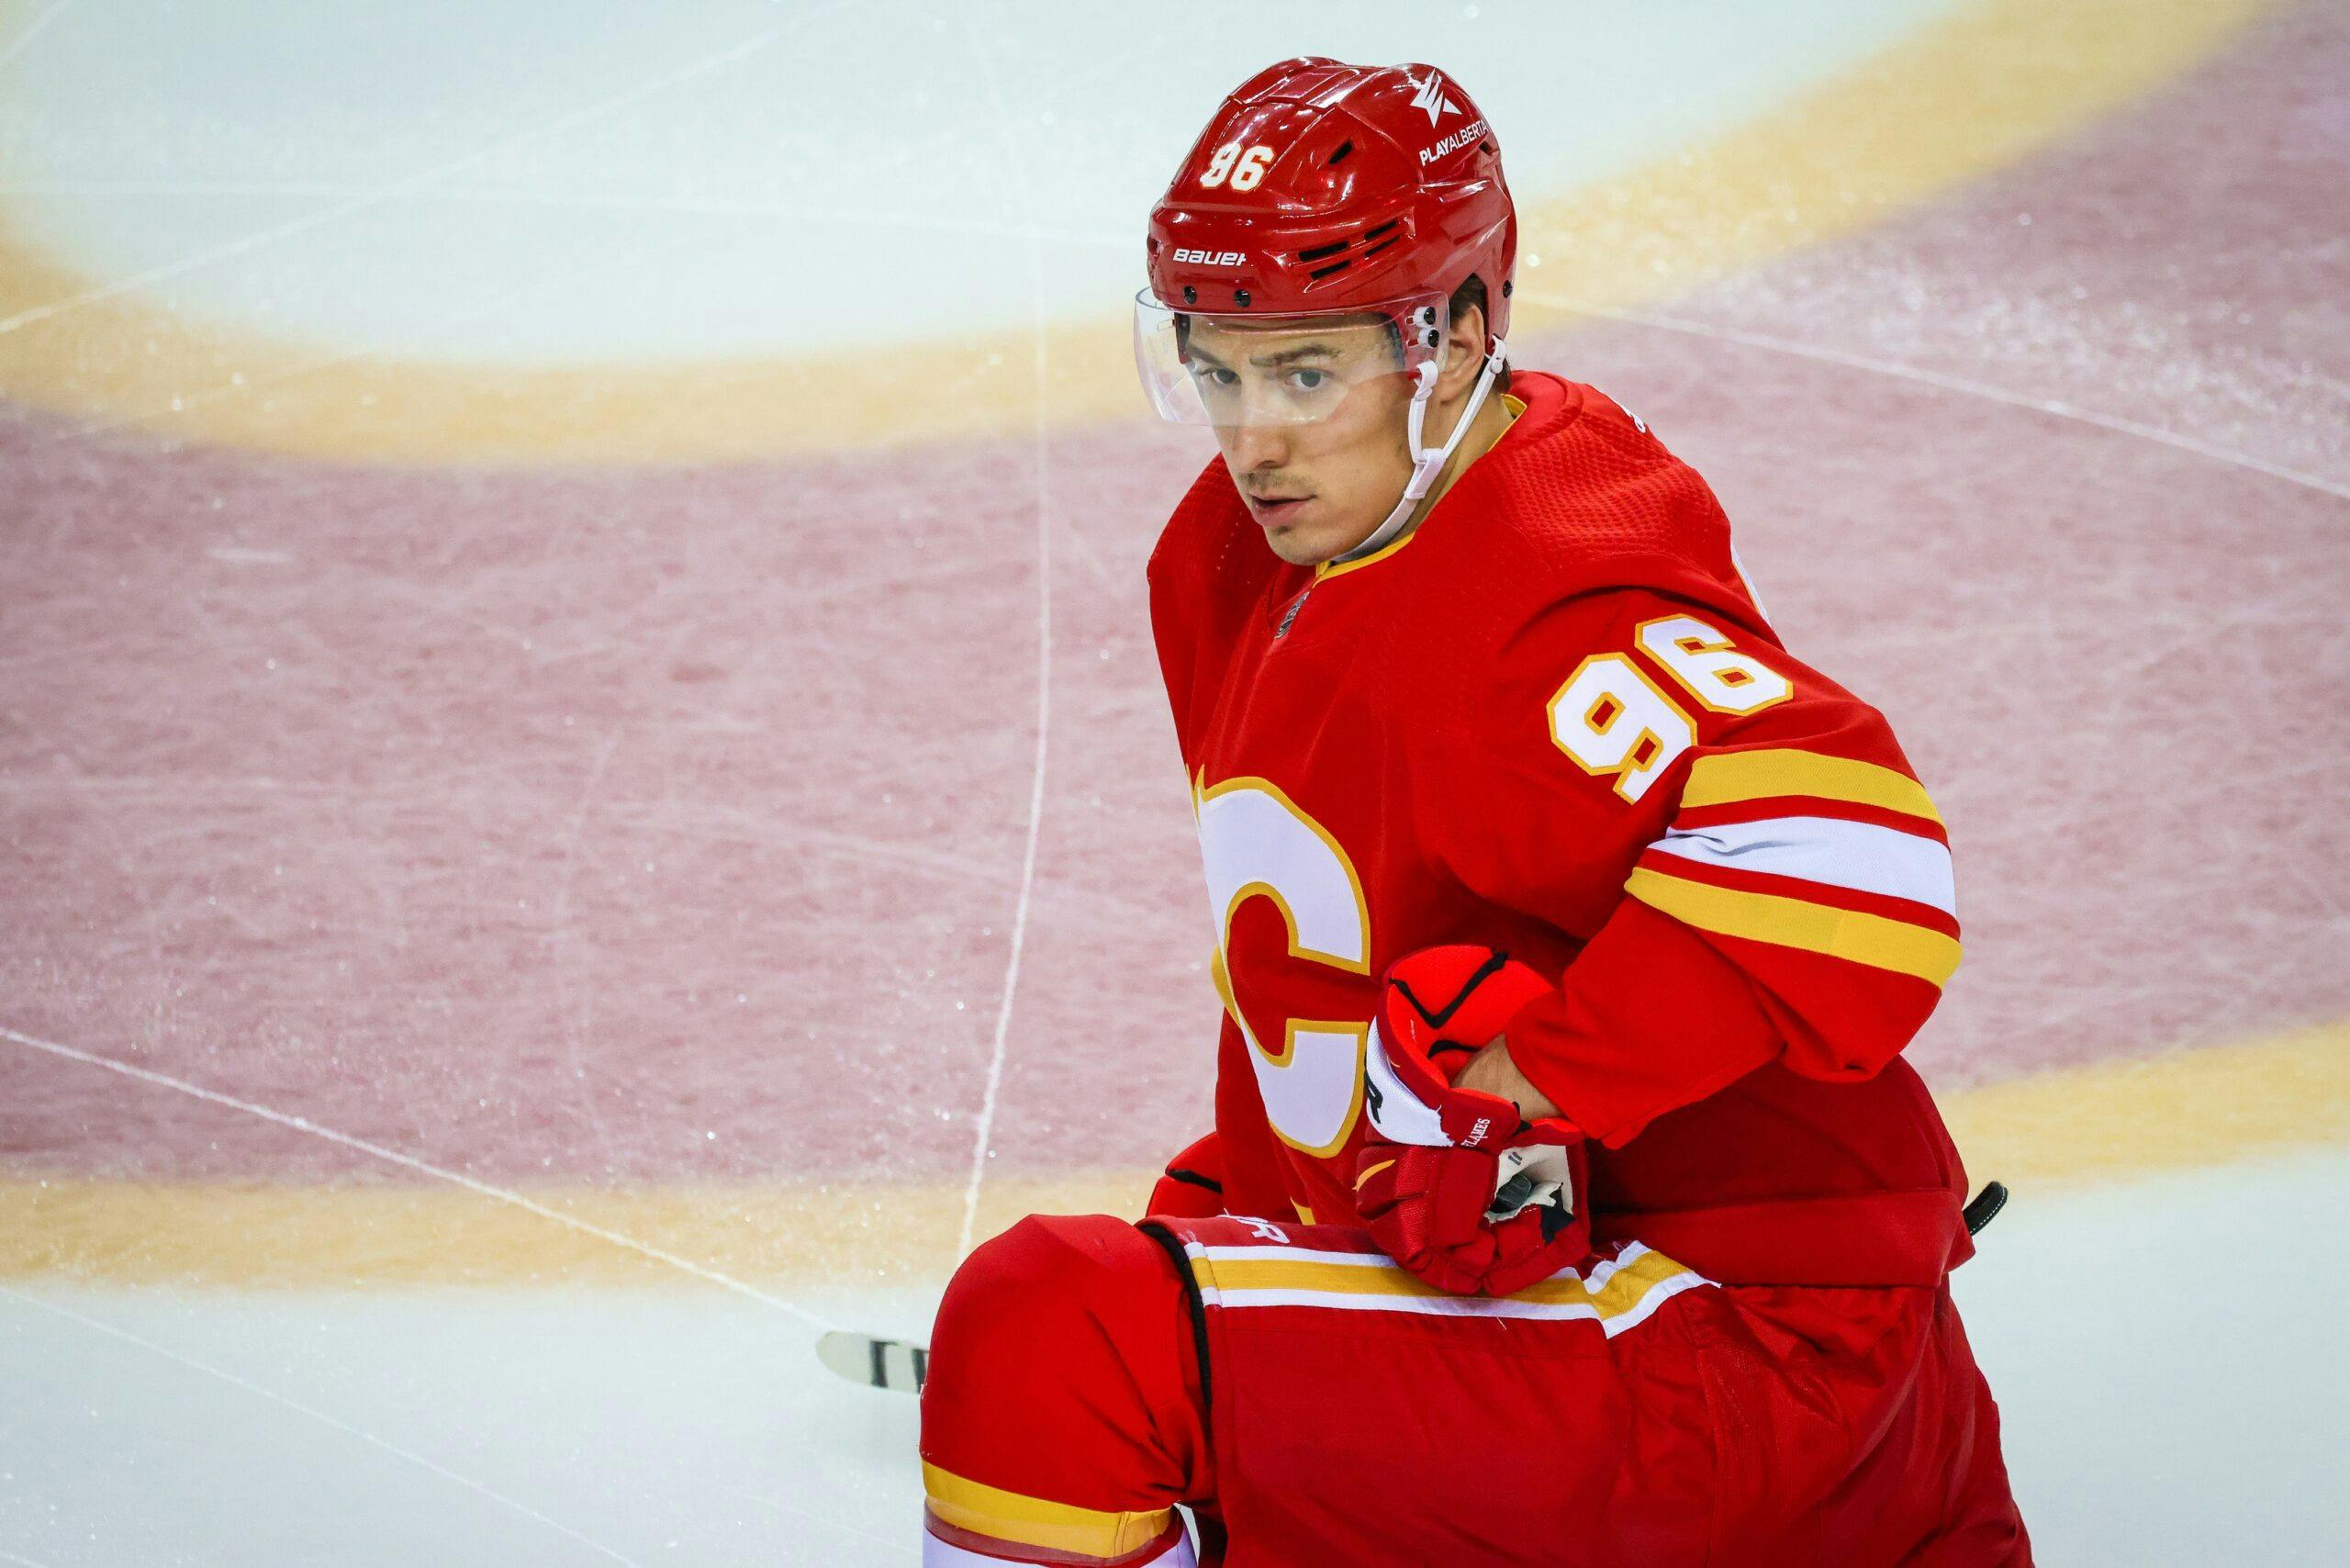 Flames forward Andrei Kuzmenko misses Tuesday’s game with upper-body injury